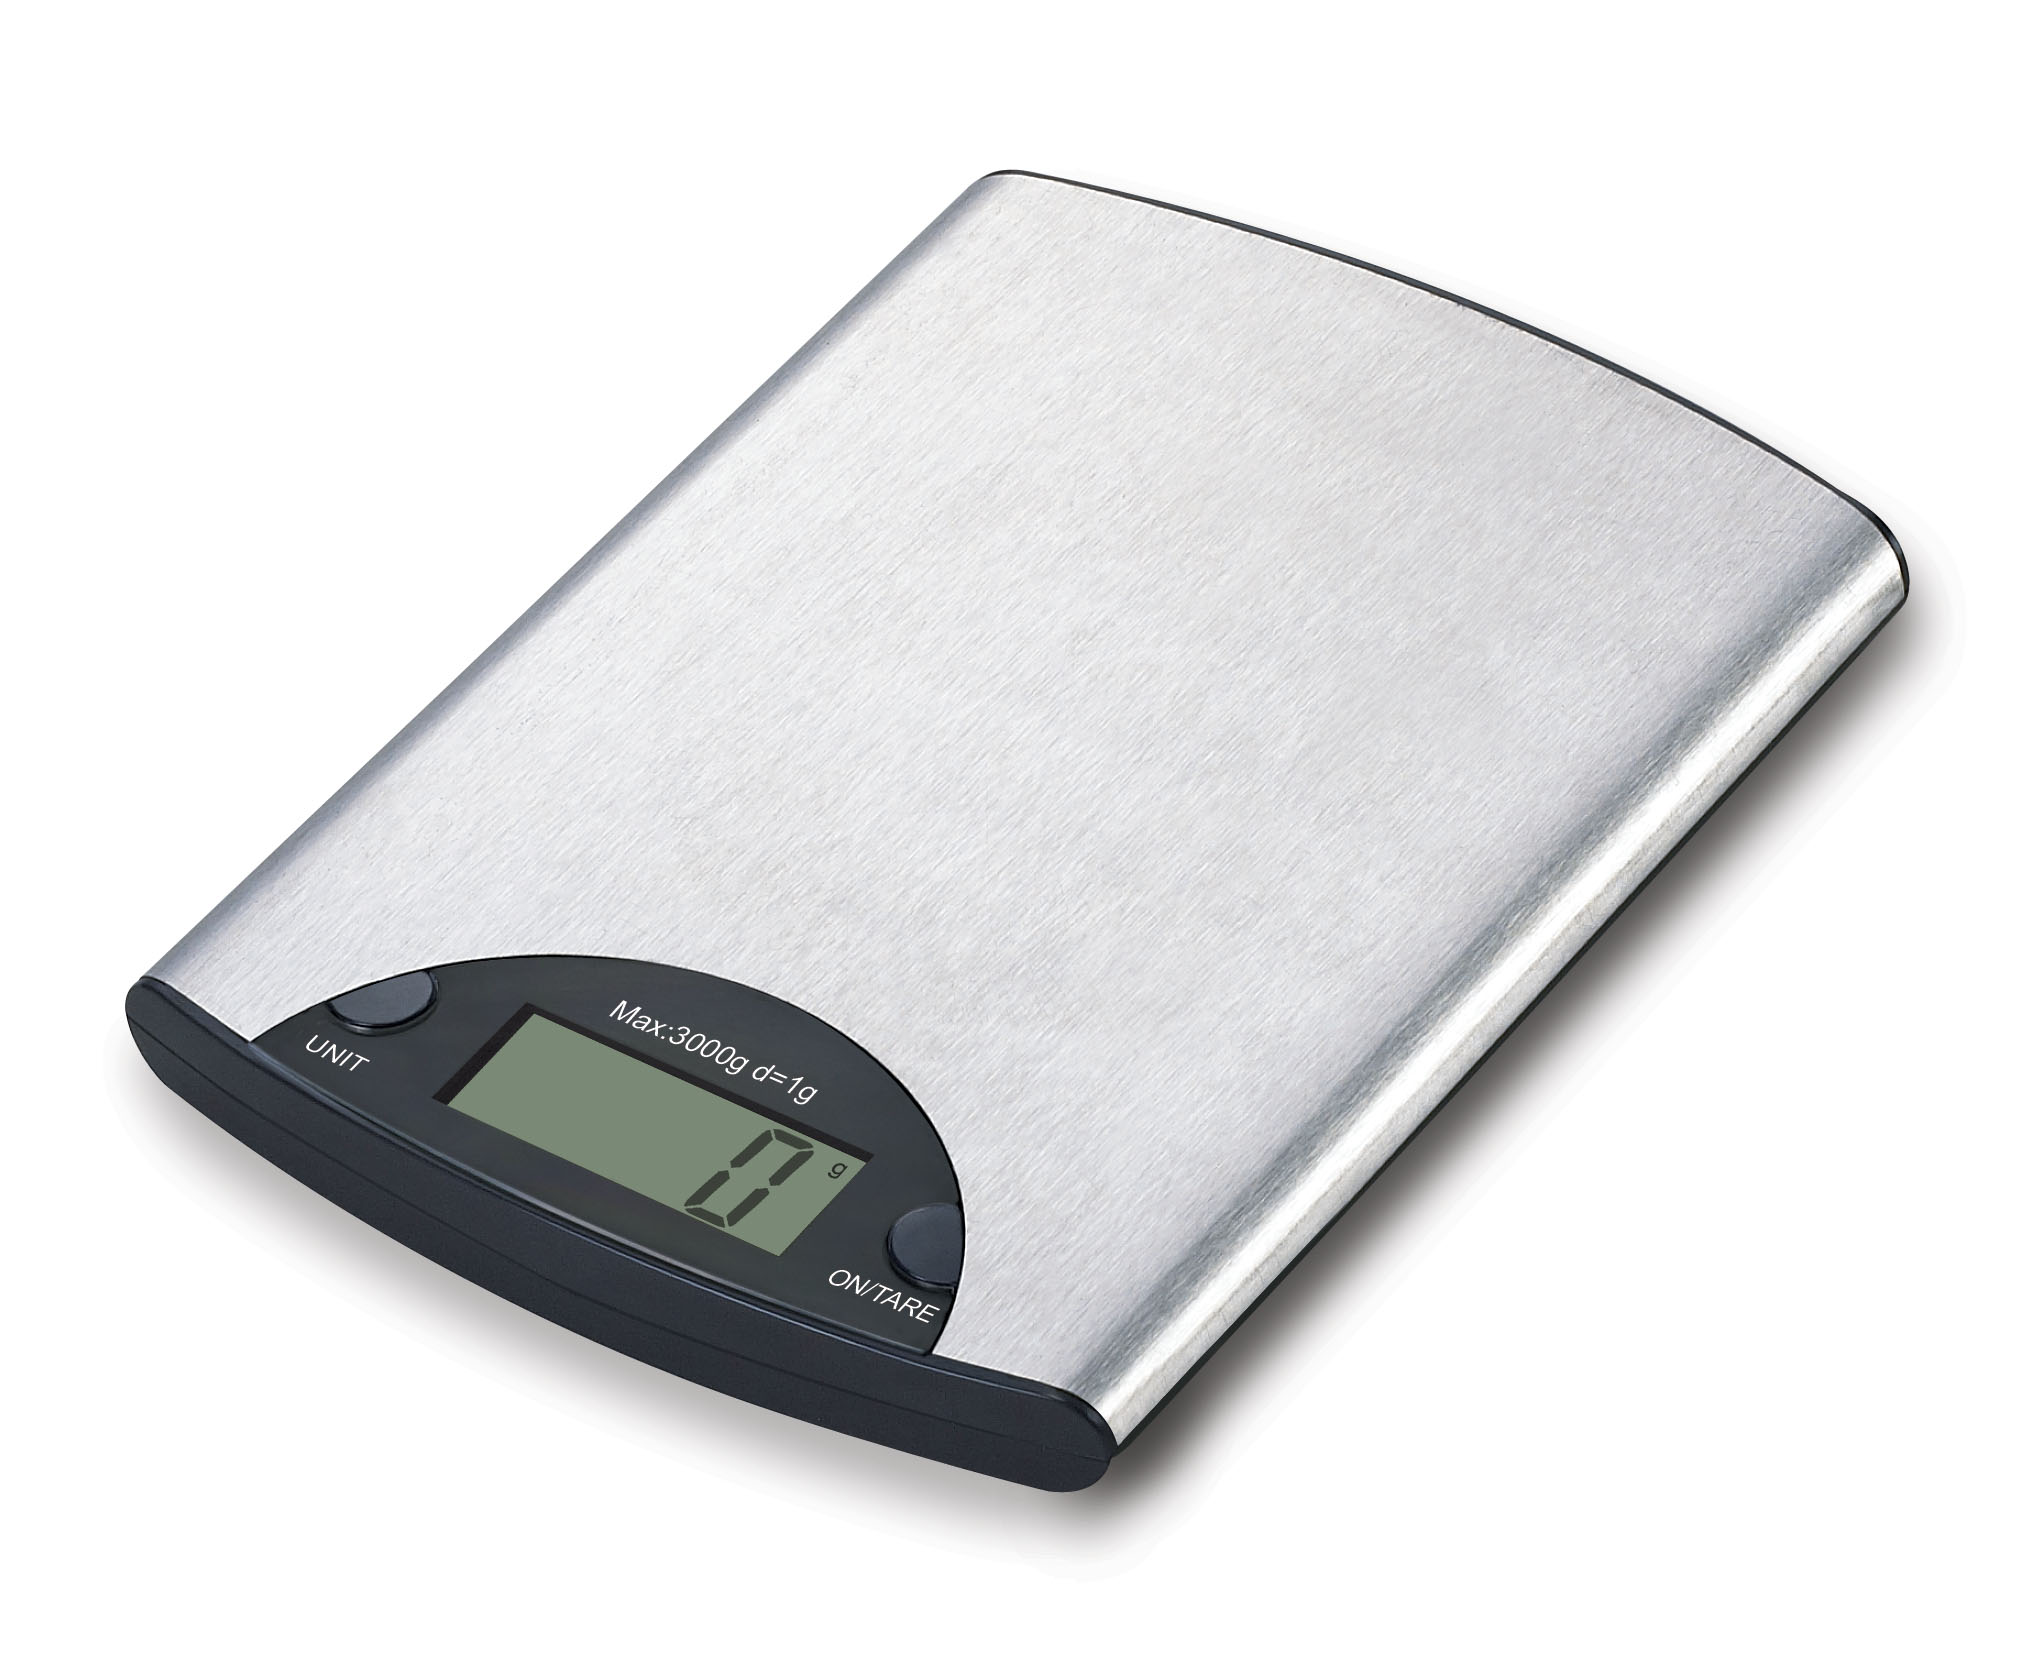 Cheap electronic kitchen scale with S&S platform